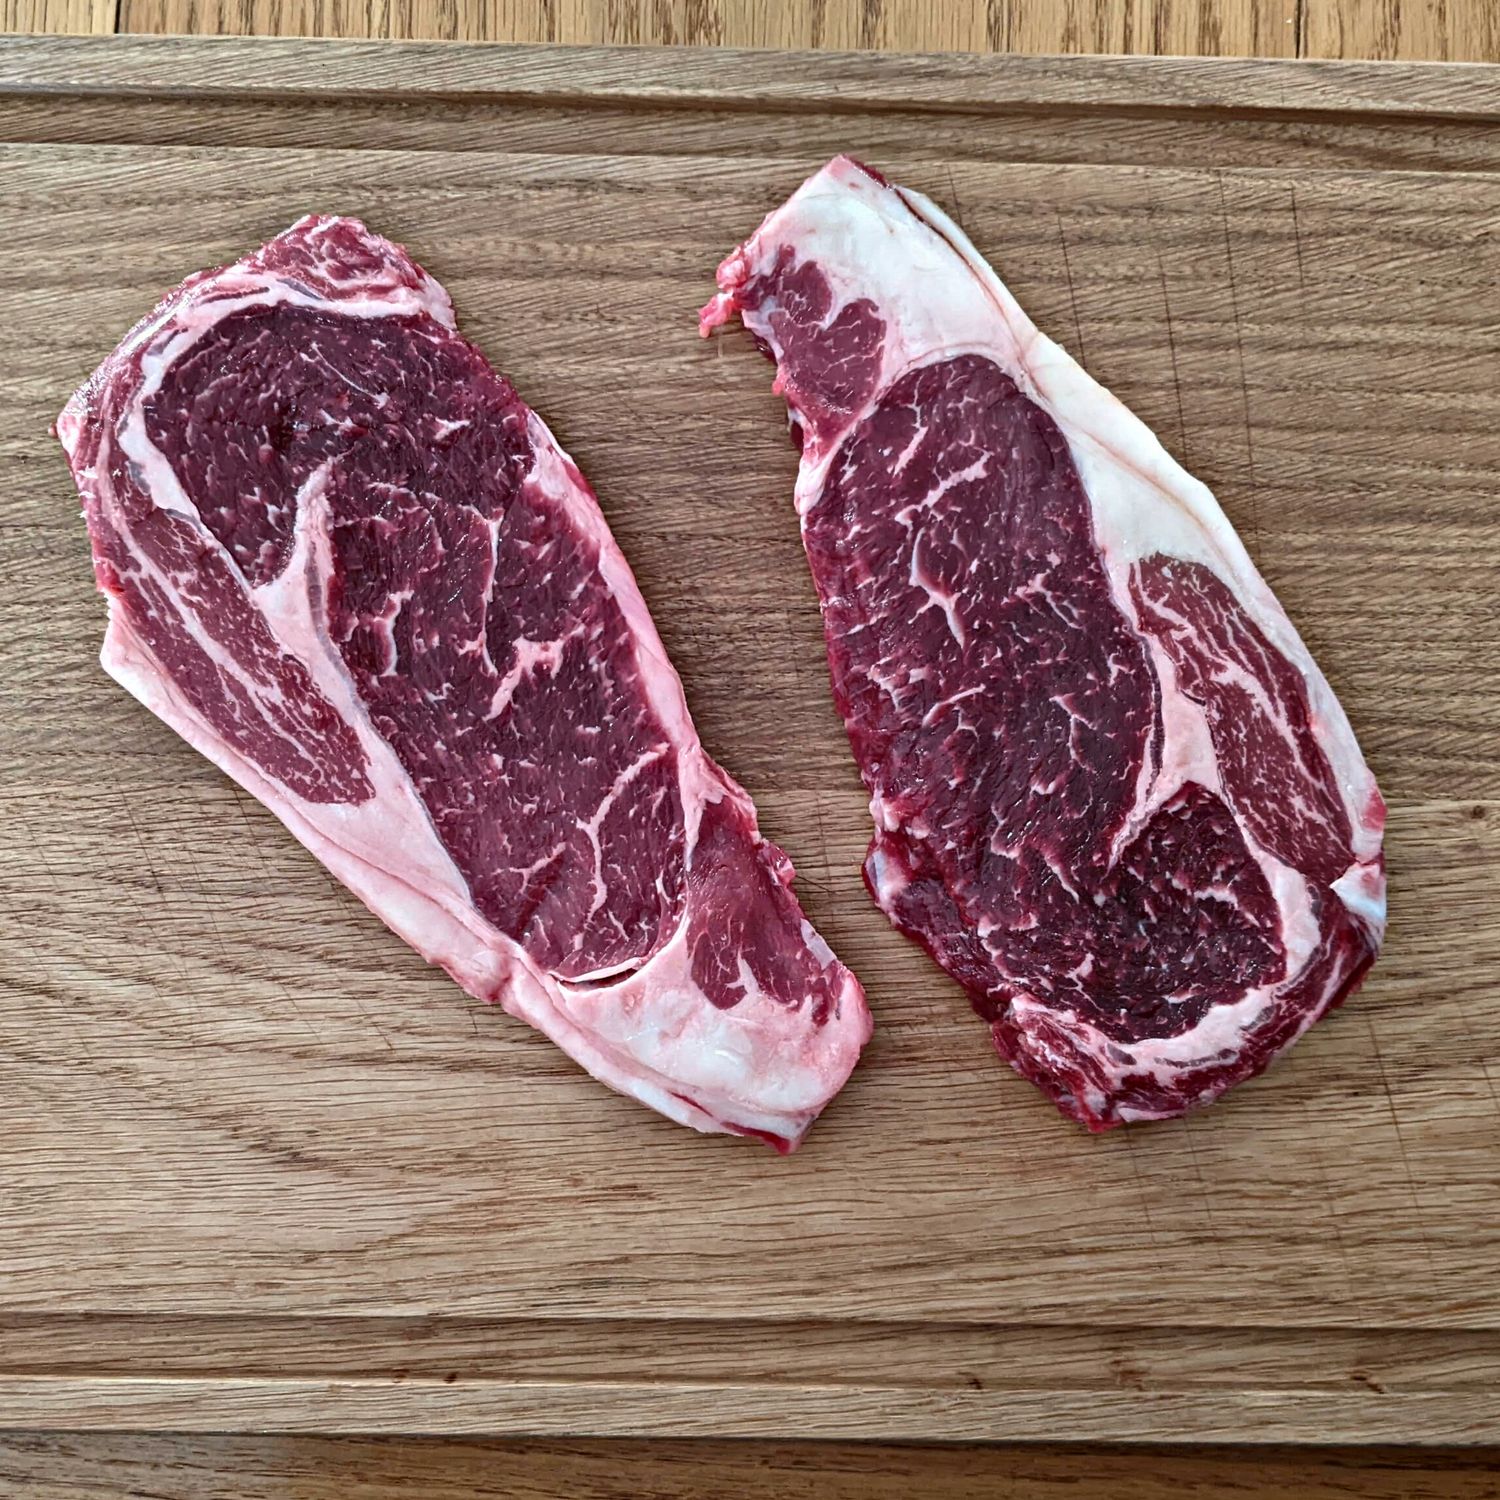 Collect from the Farm - Frozen beef